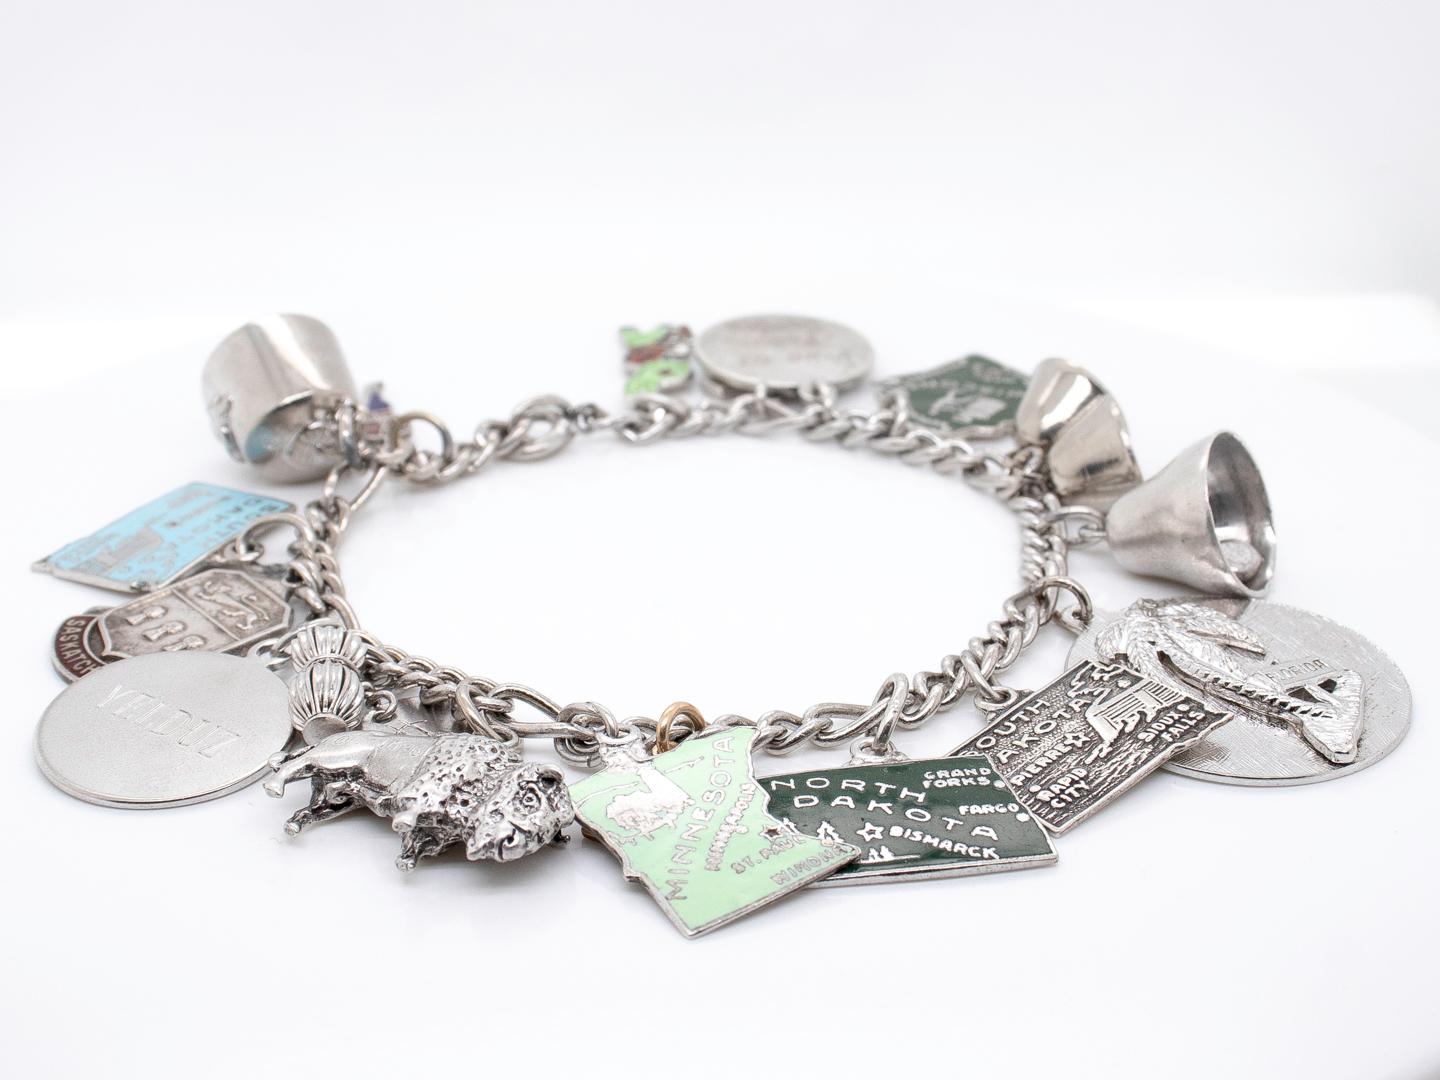 A fine Mid-Century charm bracelet.

In sterling silver.

Including 17 charms that among others include a 3-dimensional buffalo, a money bag, a Palm tree for Florida, bells, a Freemason's hat, an enameled rabbit, an enameled Canadian Mountie, and